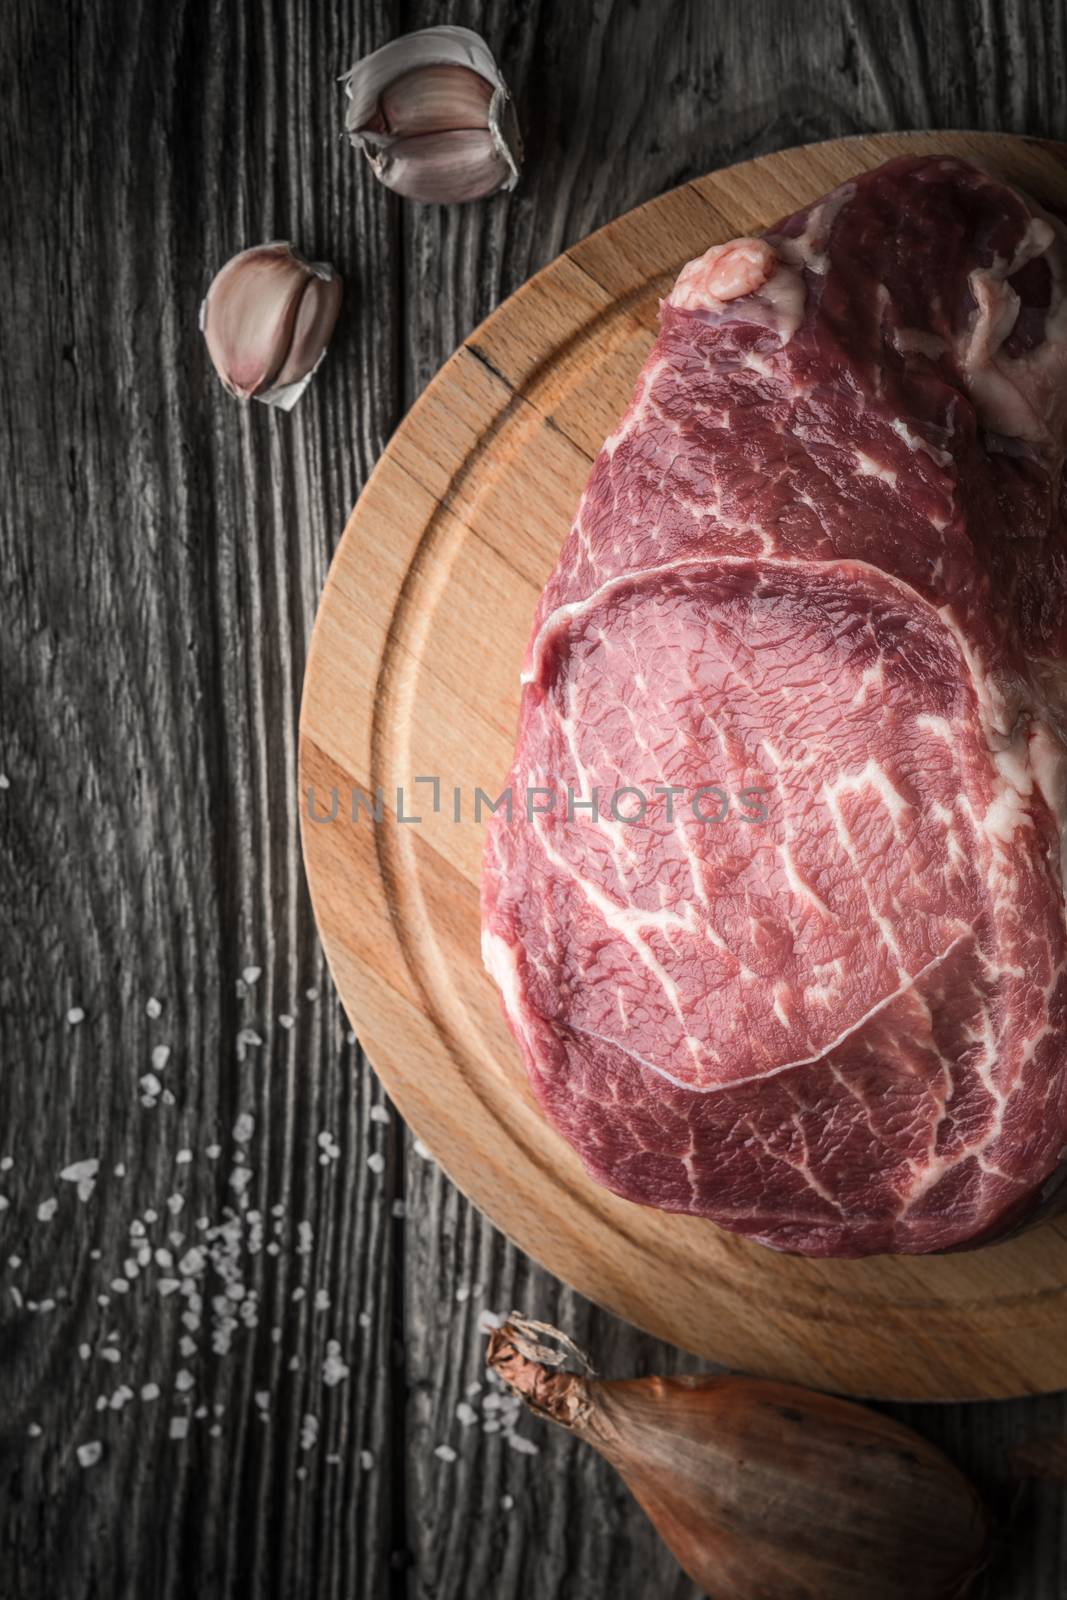 Raw angus beef  with seasoning on the wooden table vertical